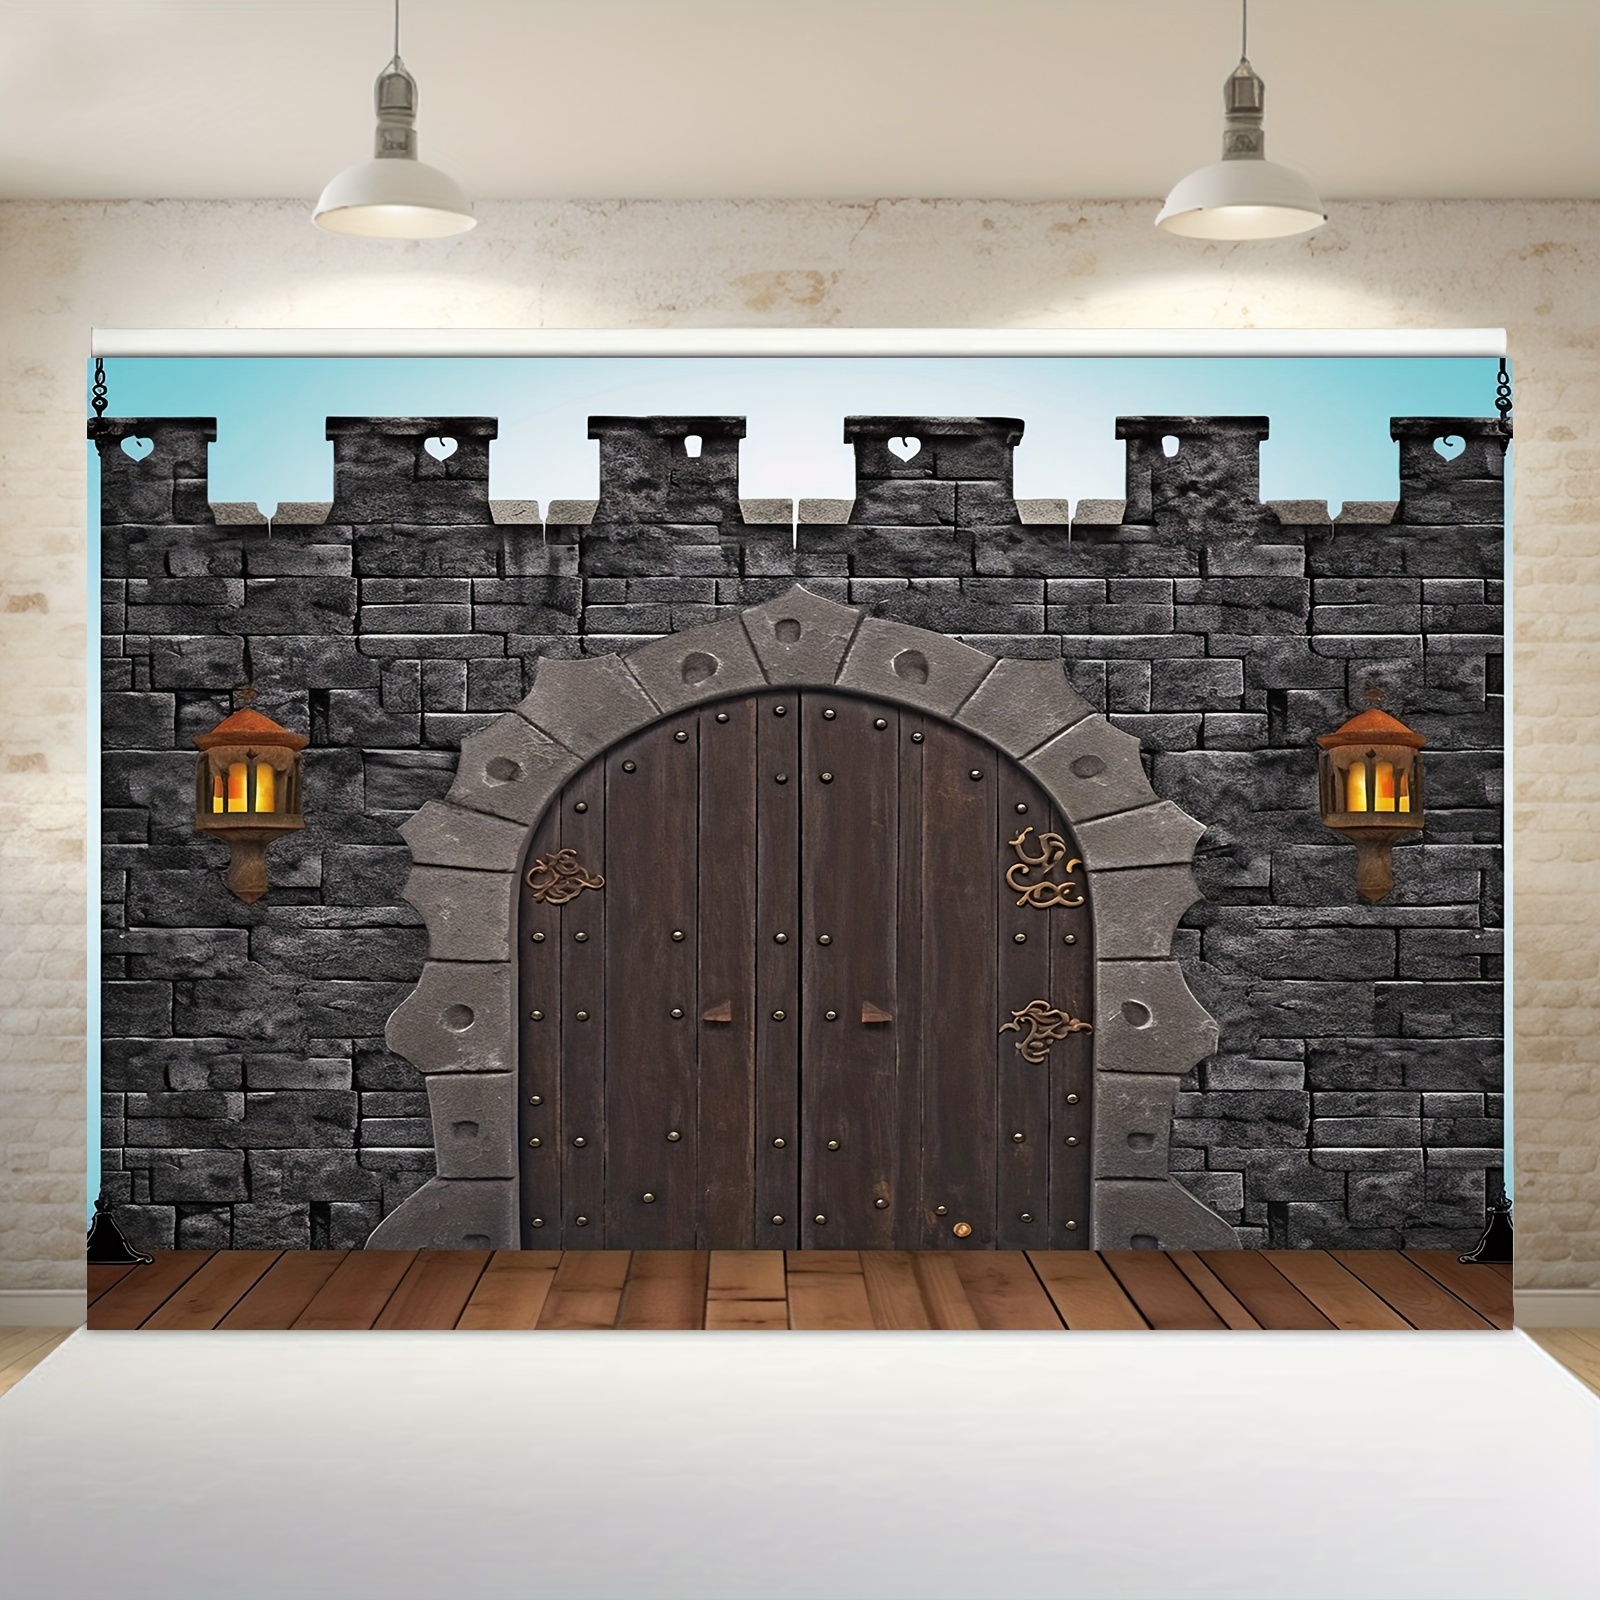 

1pc Medieval Castle Background, Knight Decoration Castle Wall Background, Kingdom Guardian Vbs Medieval Themed Party Supplies Decorations, 59x39 Inch